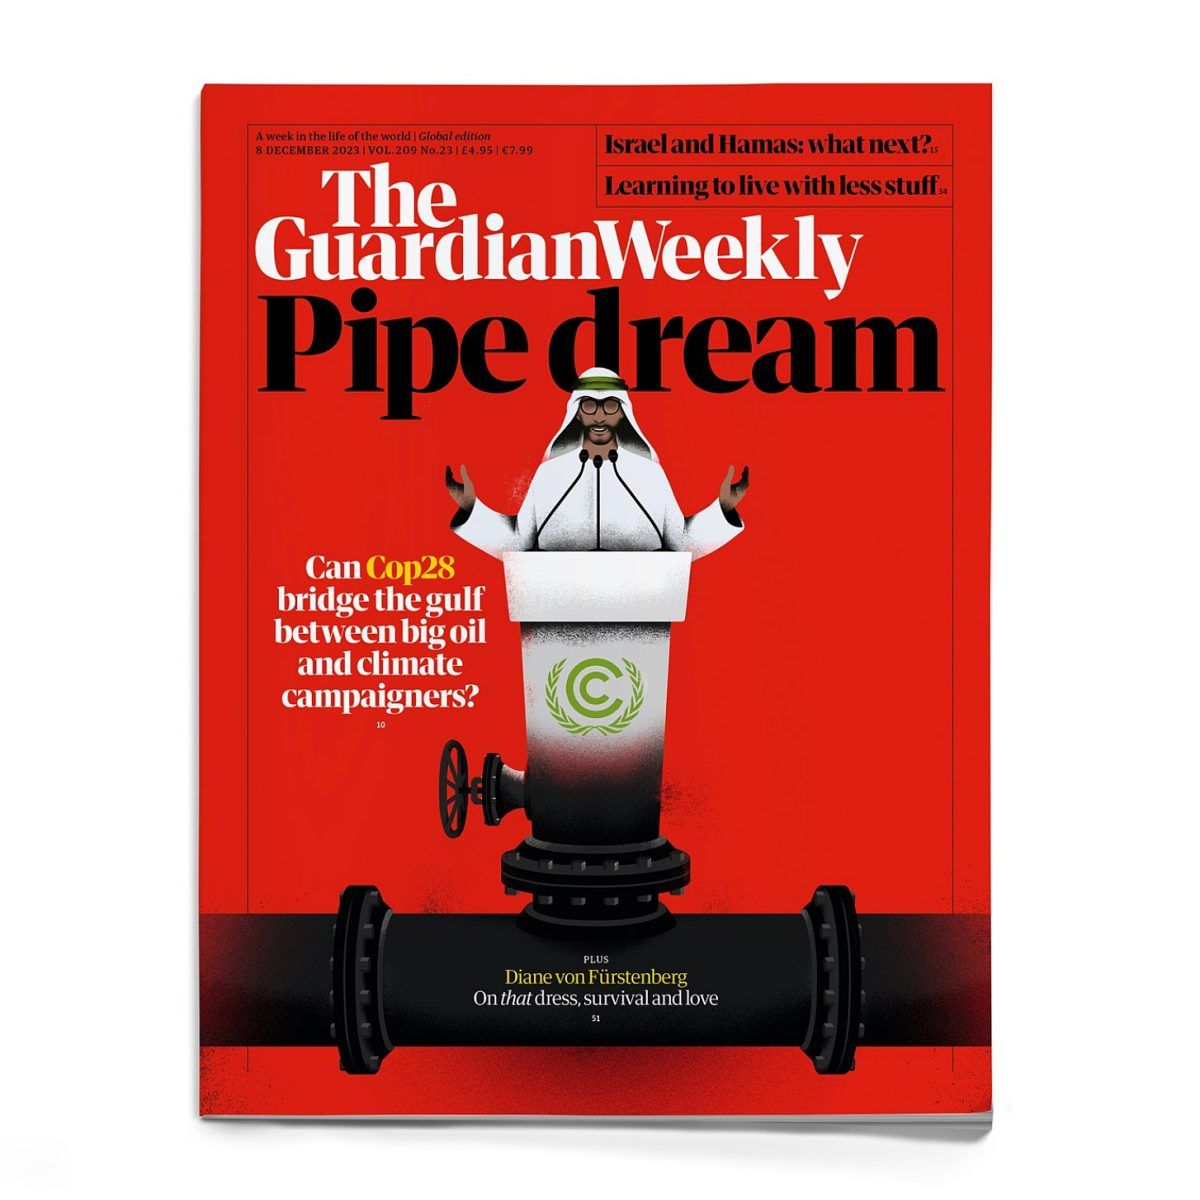 Sébastien Thibault / The Guardian / Pipe dream – Can Cop28 bridge the gulf between big oil and climate campaigners? - Sebastien Thibault - Anna Goodson Illustration Agency